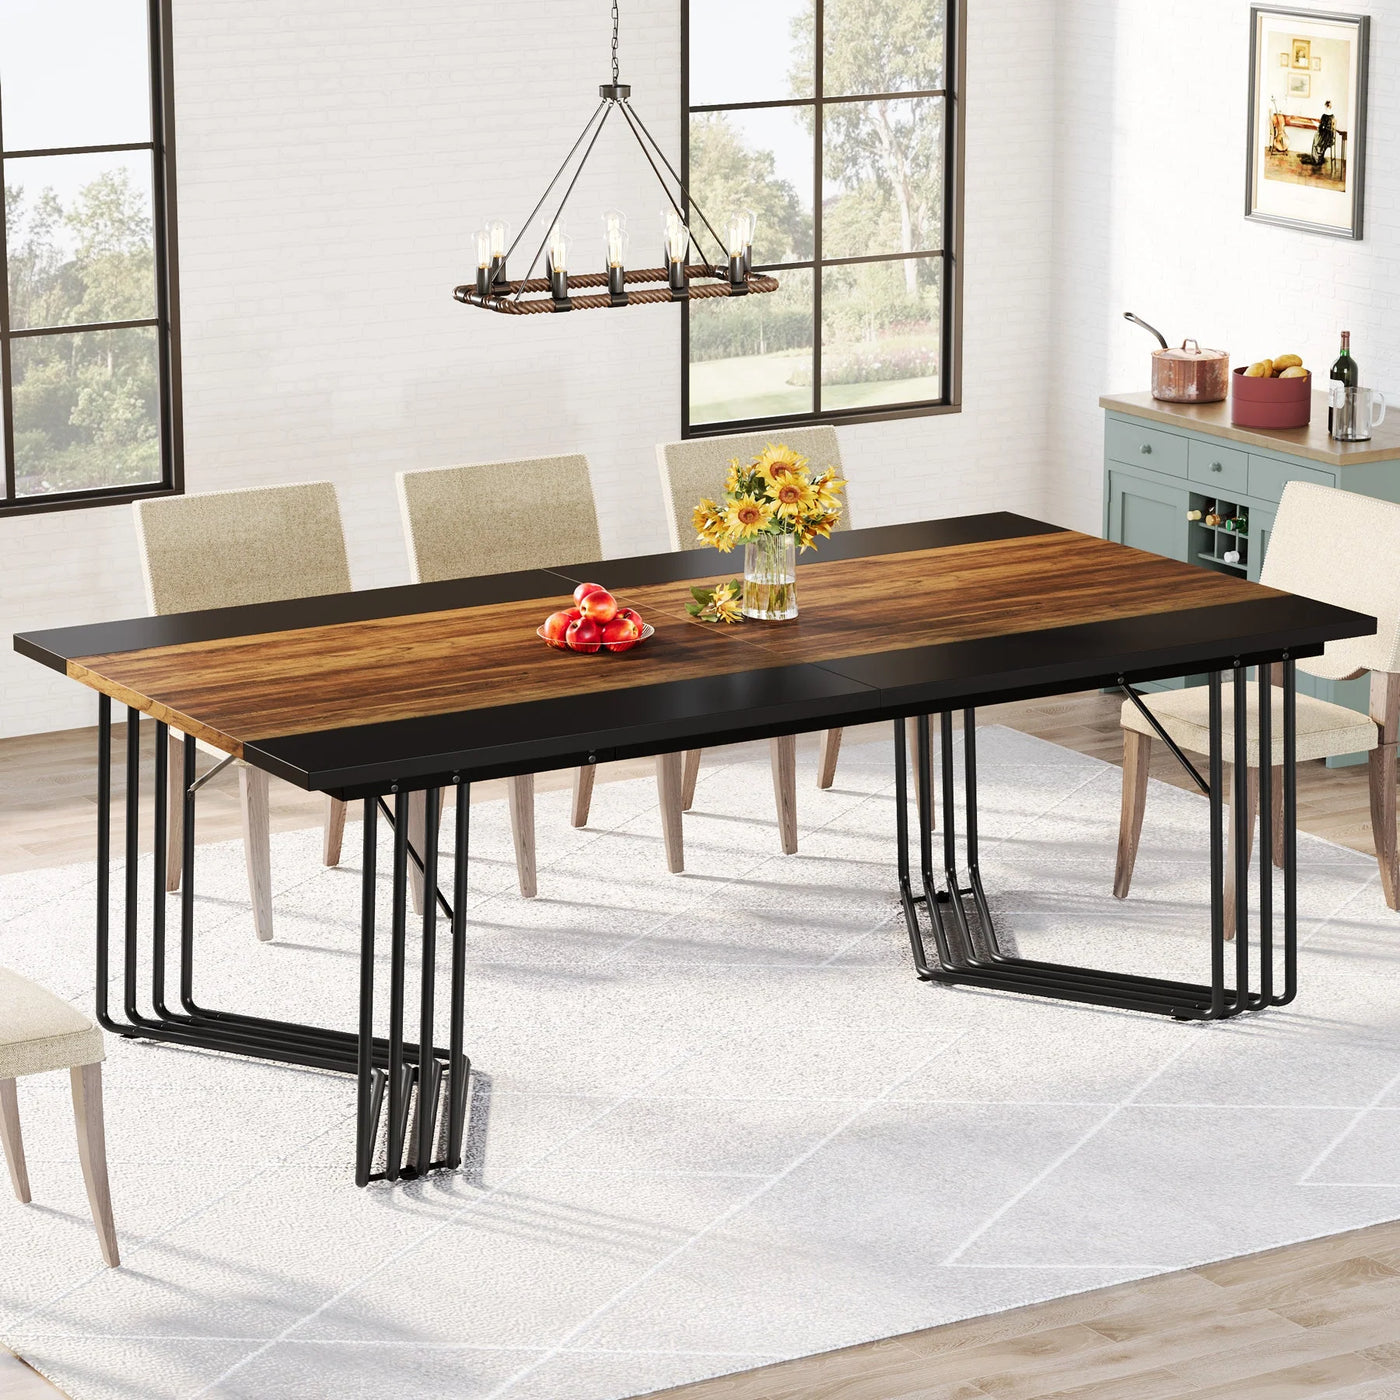 Raya Industrial Dining Table | Brown Black Wood Large Kitchen Table for 6-8 People